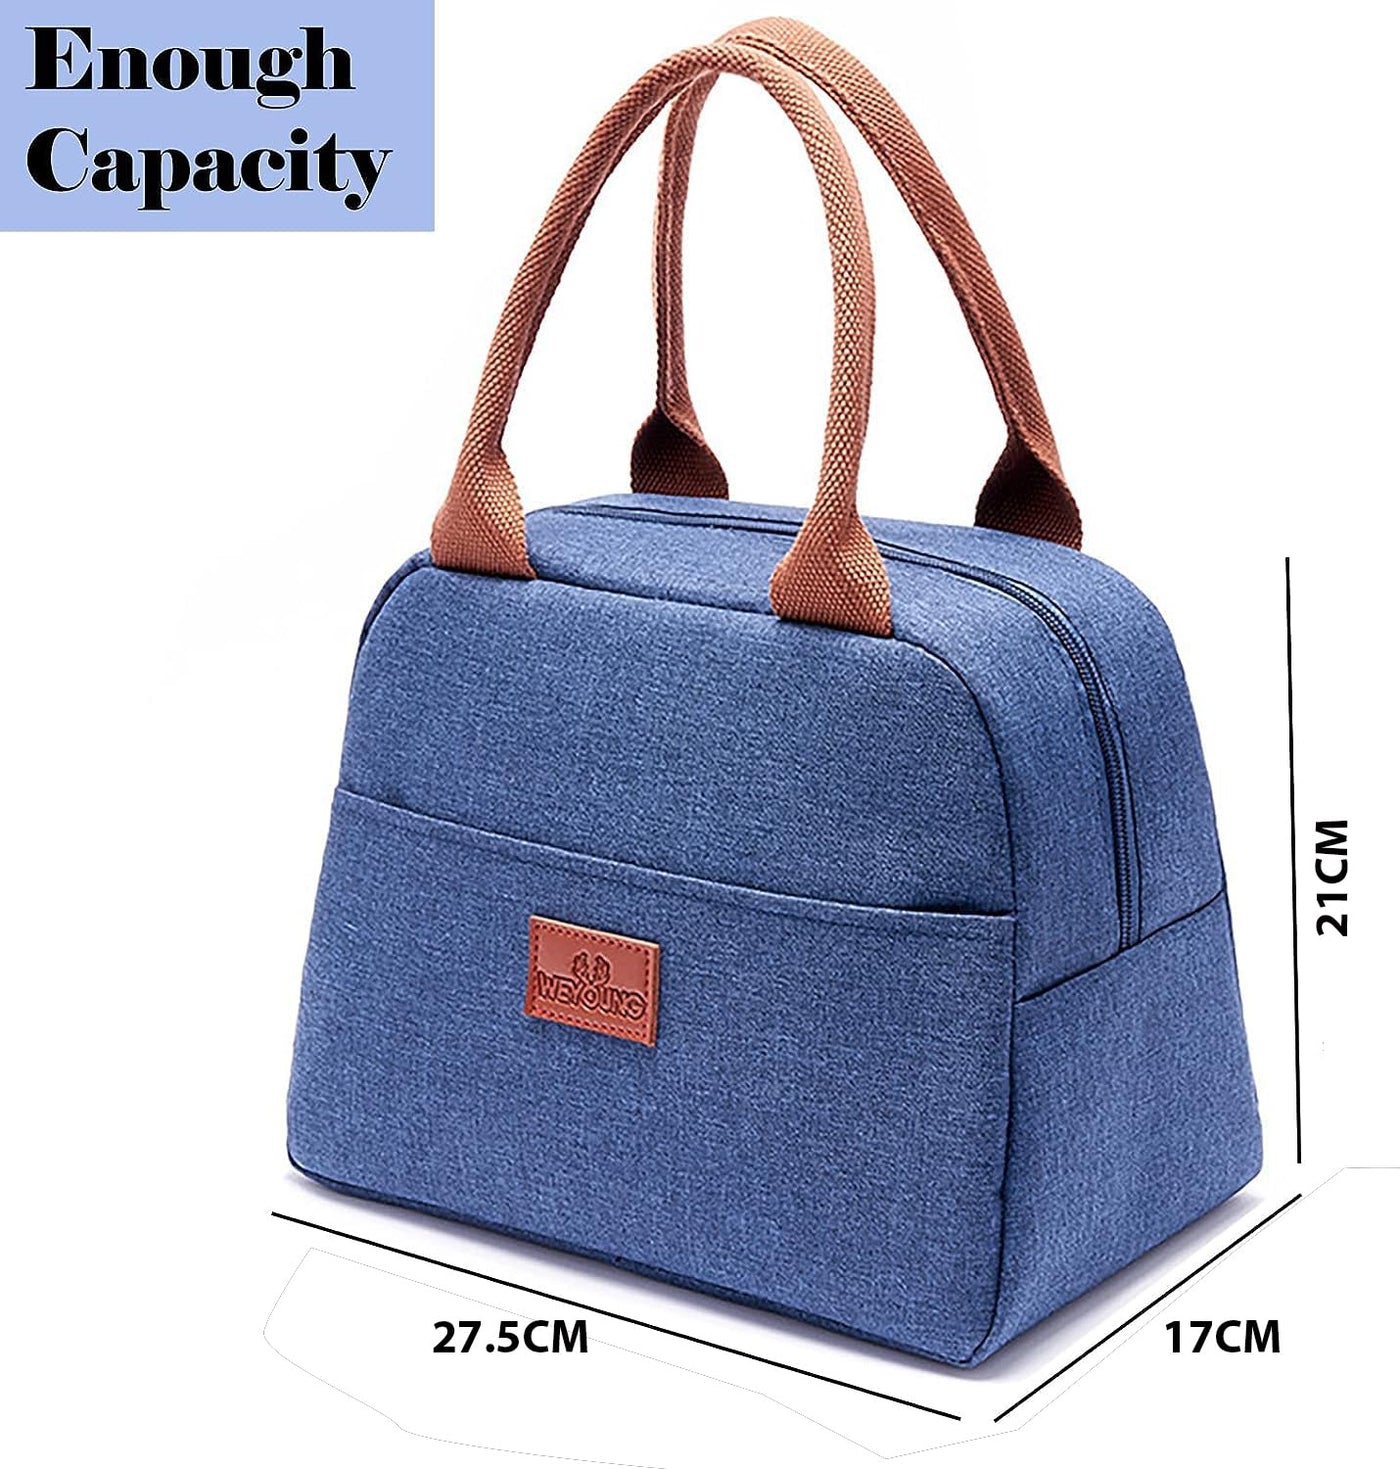 Insulated Reusable Lunch Bag Tote Bag for Women -  (Denim Blue)